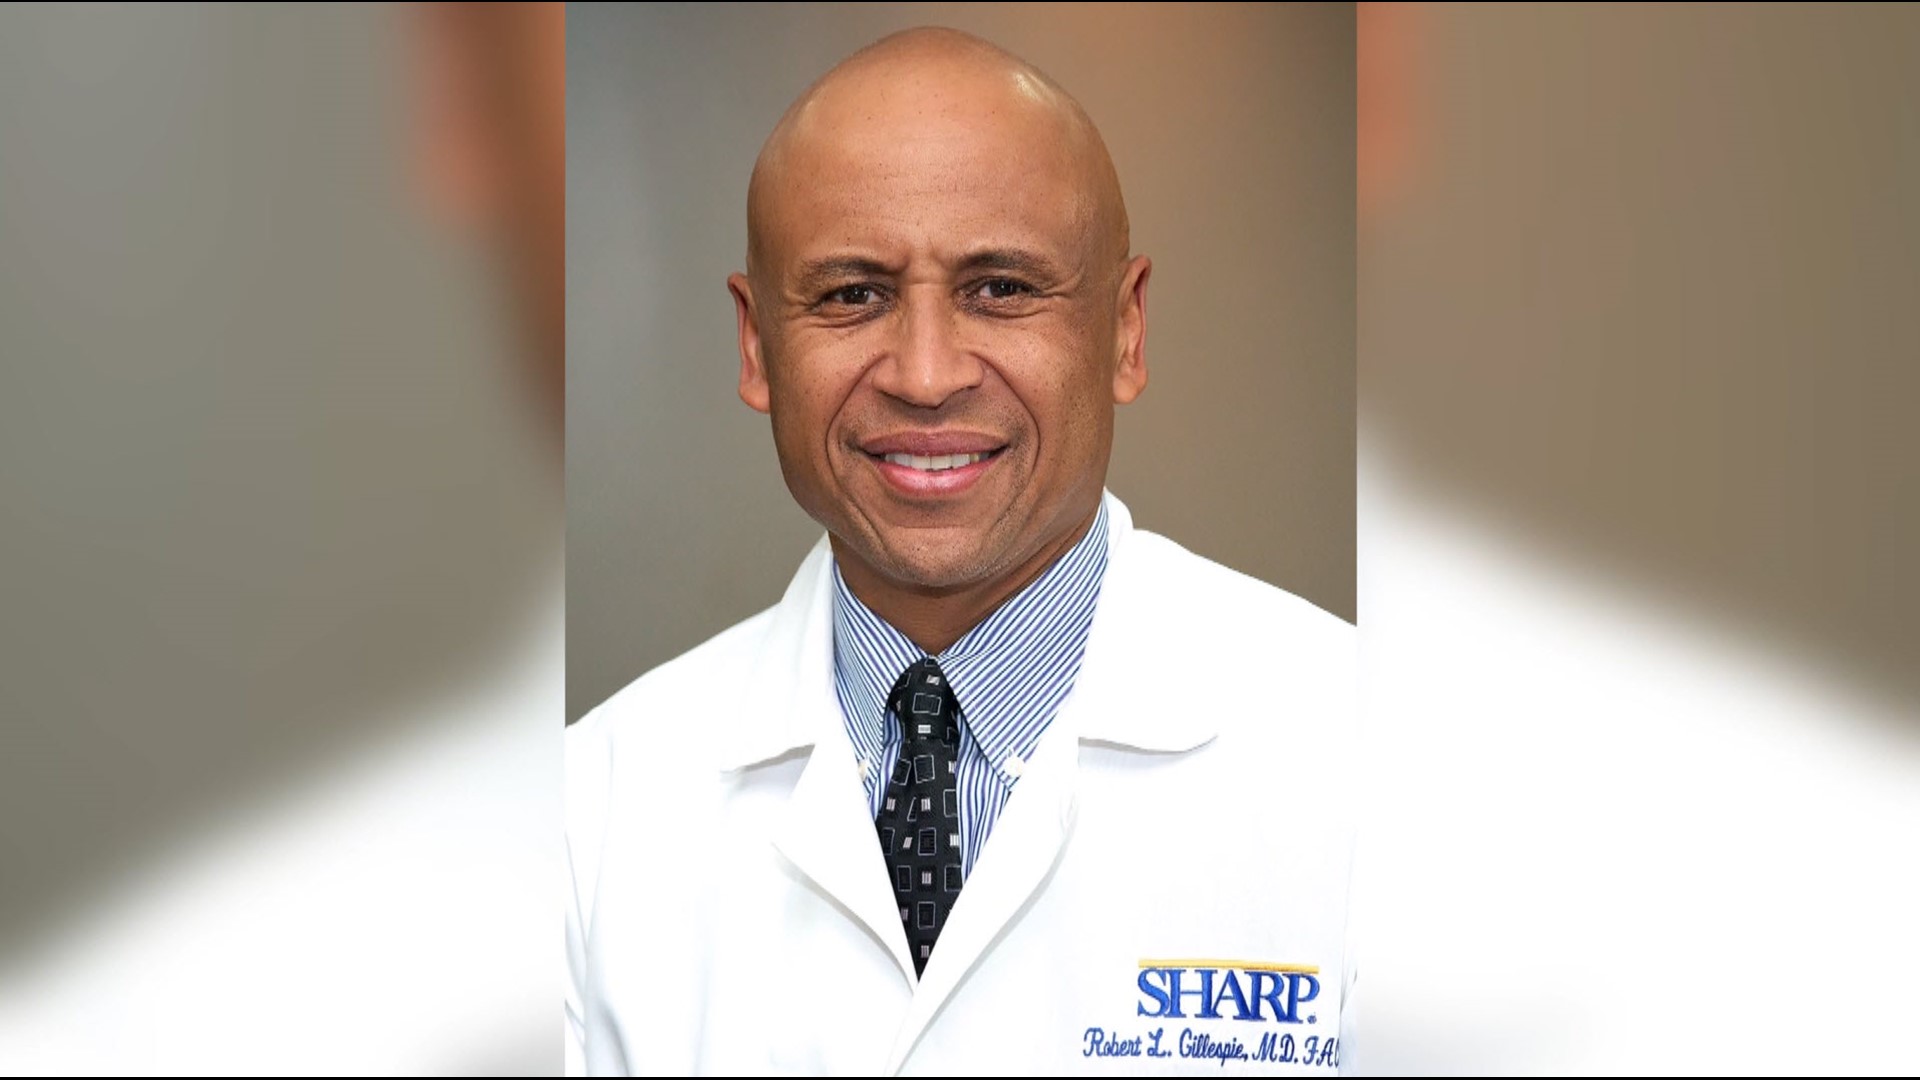 Becoming a doctor was always his destiny. However, being a black kid from Indiana in the late ’60s and with such strong aspirations, came with some barriers.